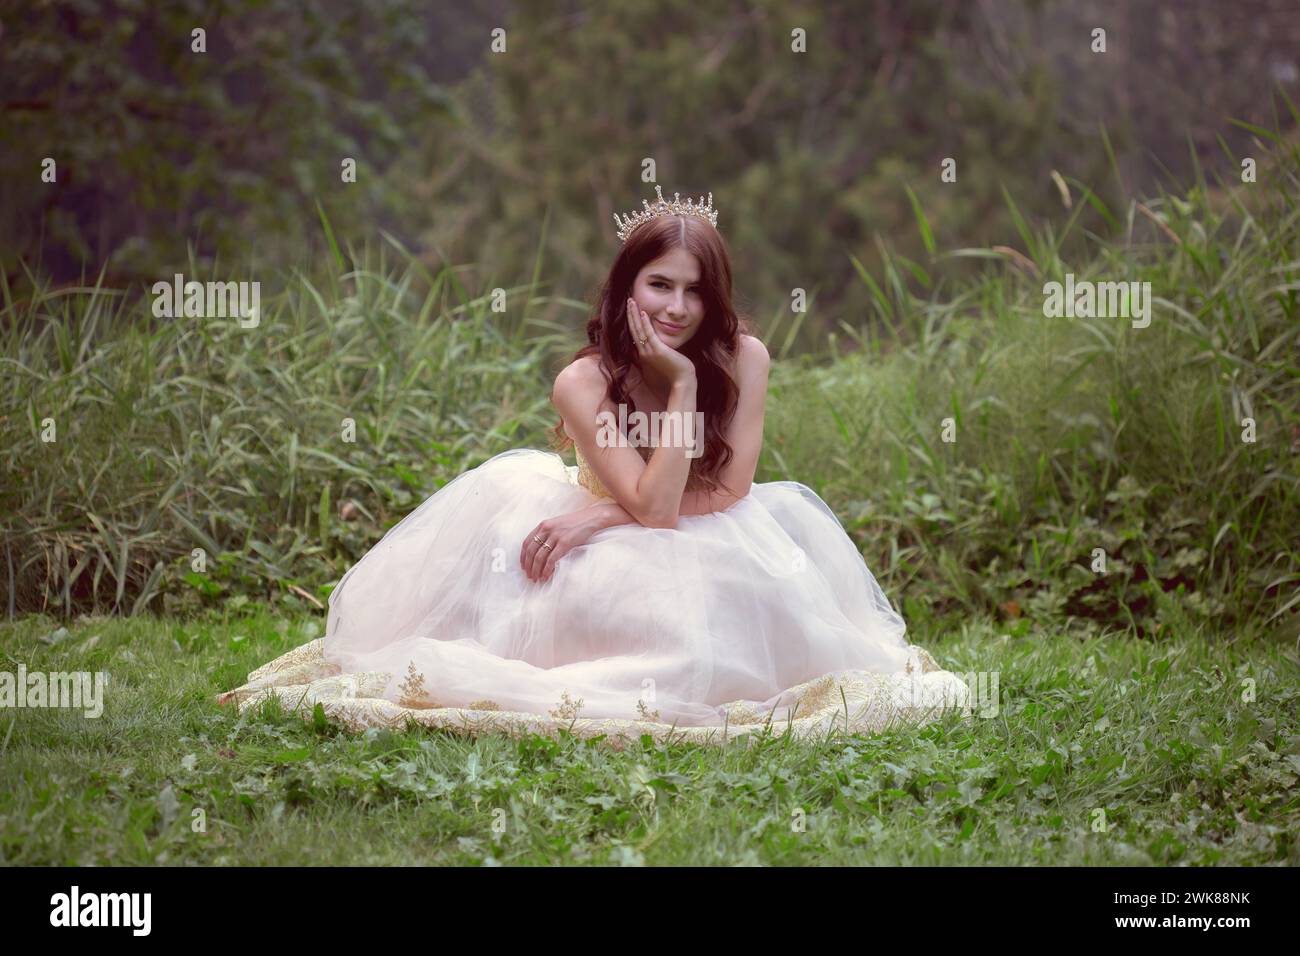 Smiling Woman in White Gown in Field Stock Photo